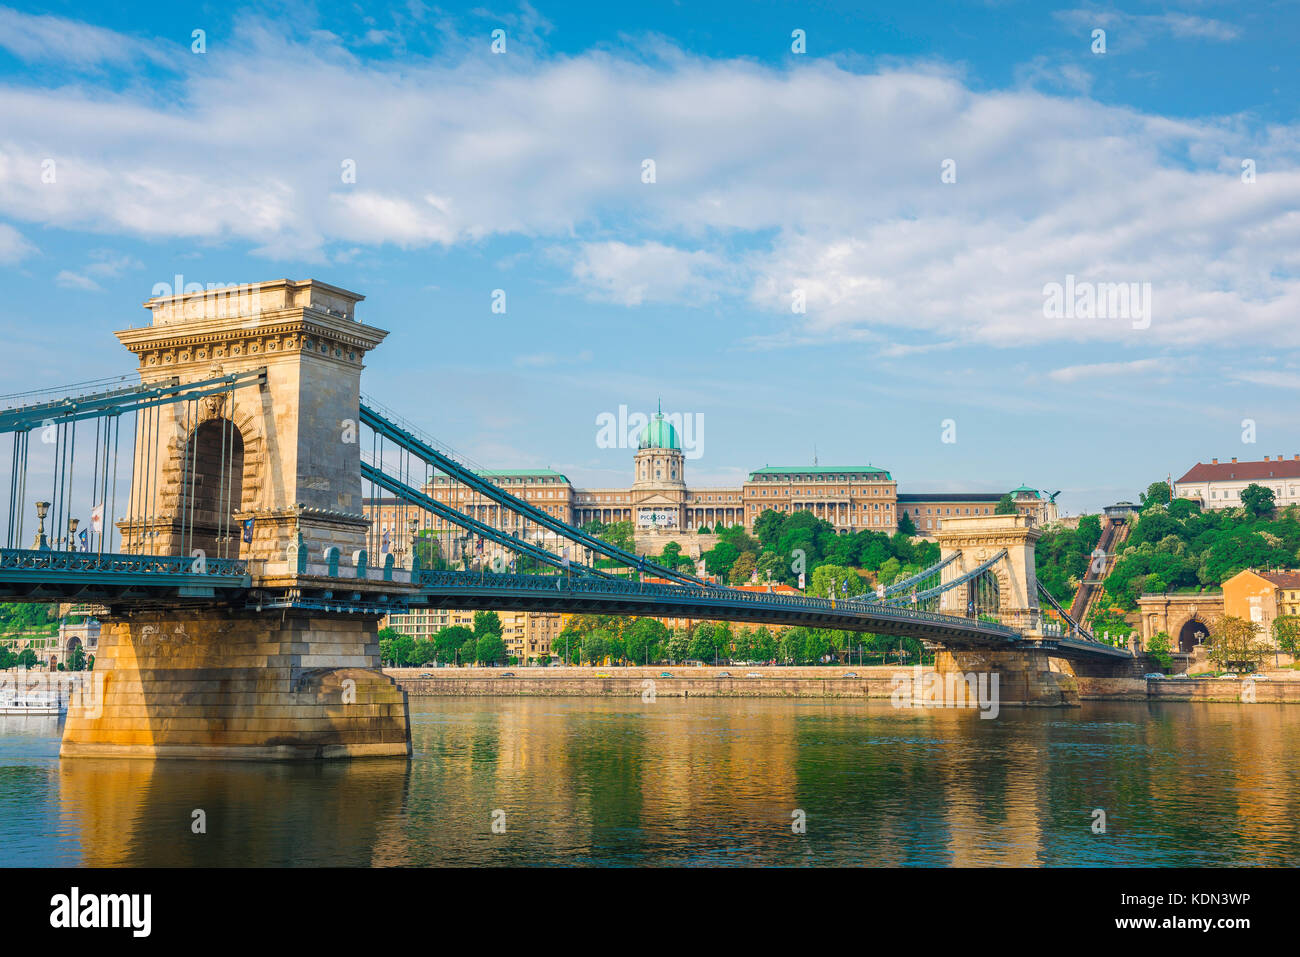 Budapest city view, view of the Royal Palace sited on Castle Hill with the Chain (Lanchid) Bridge in the foreground. Stock Photo